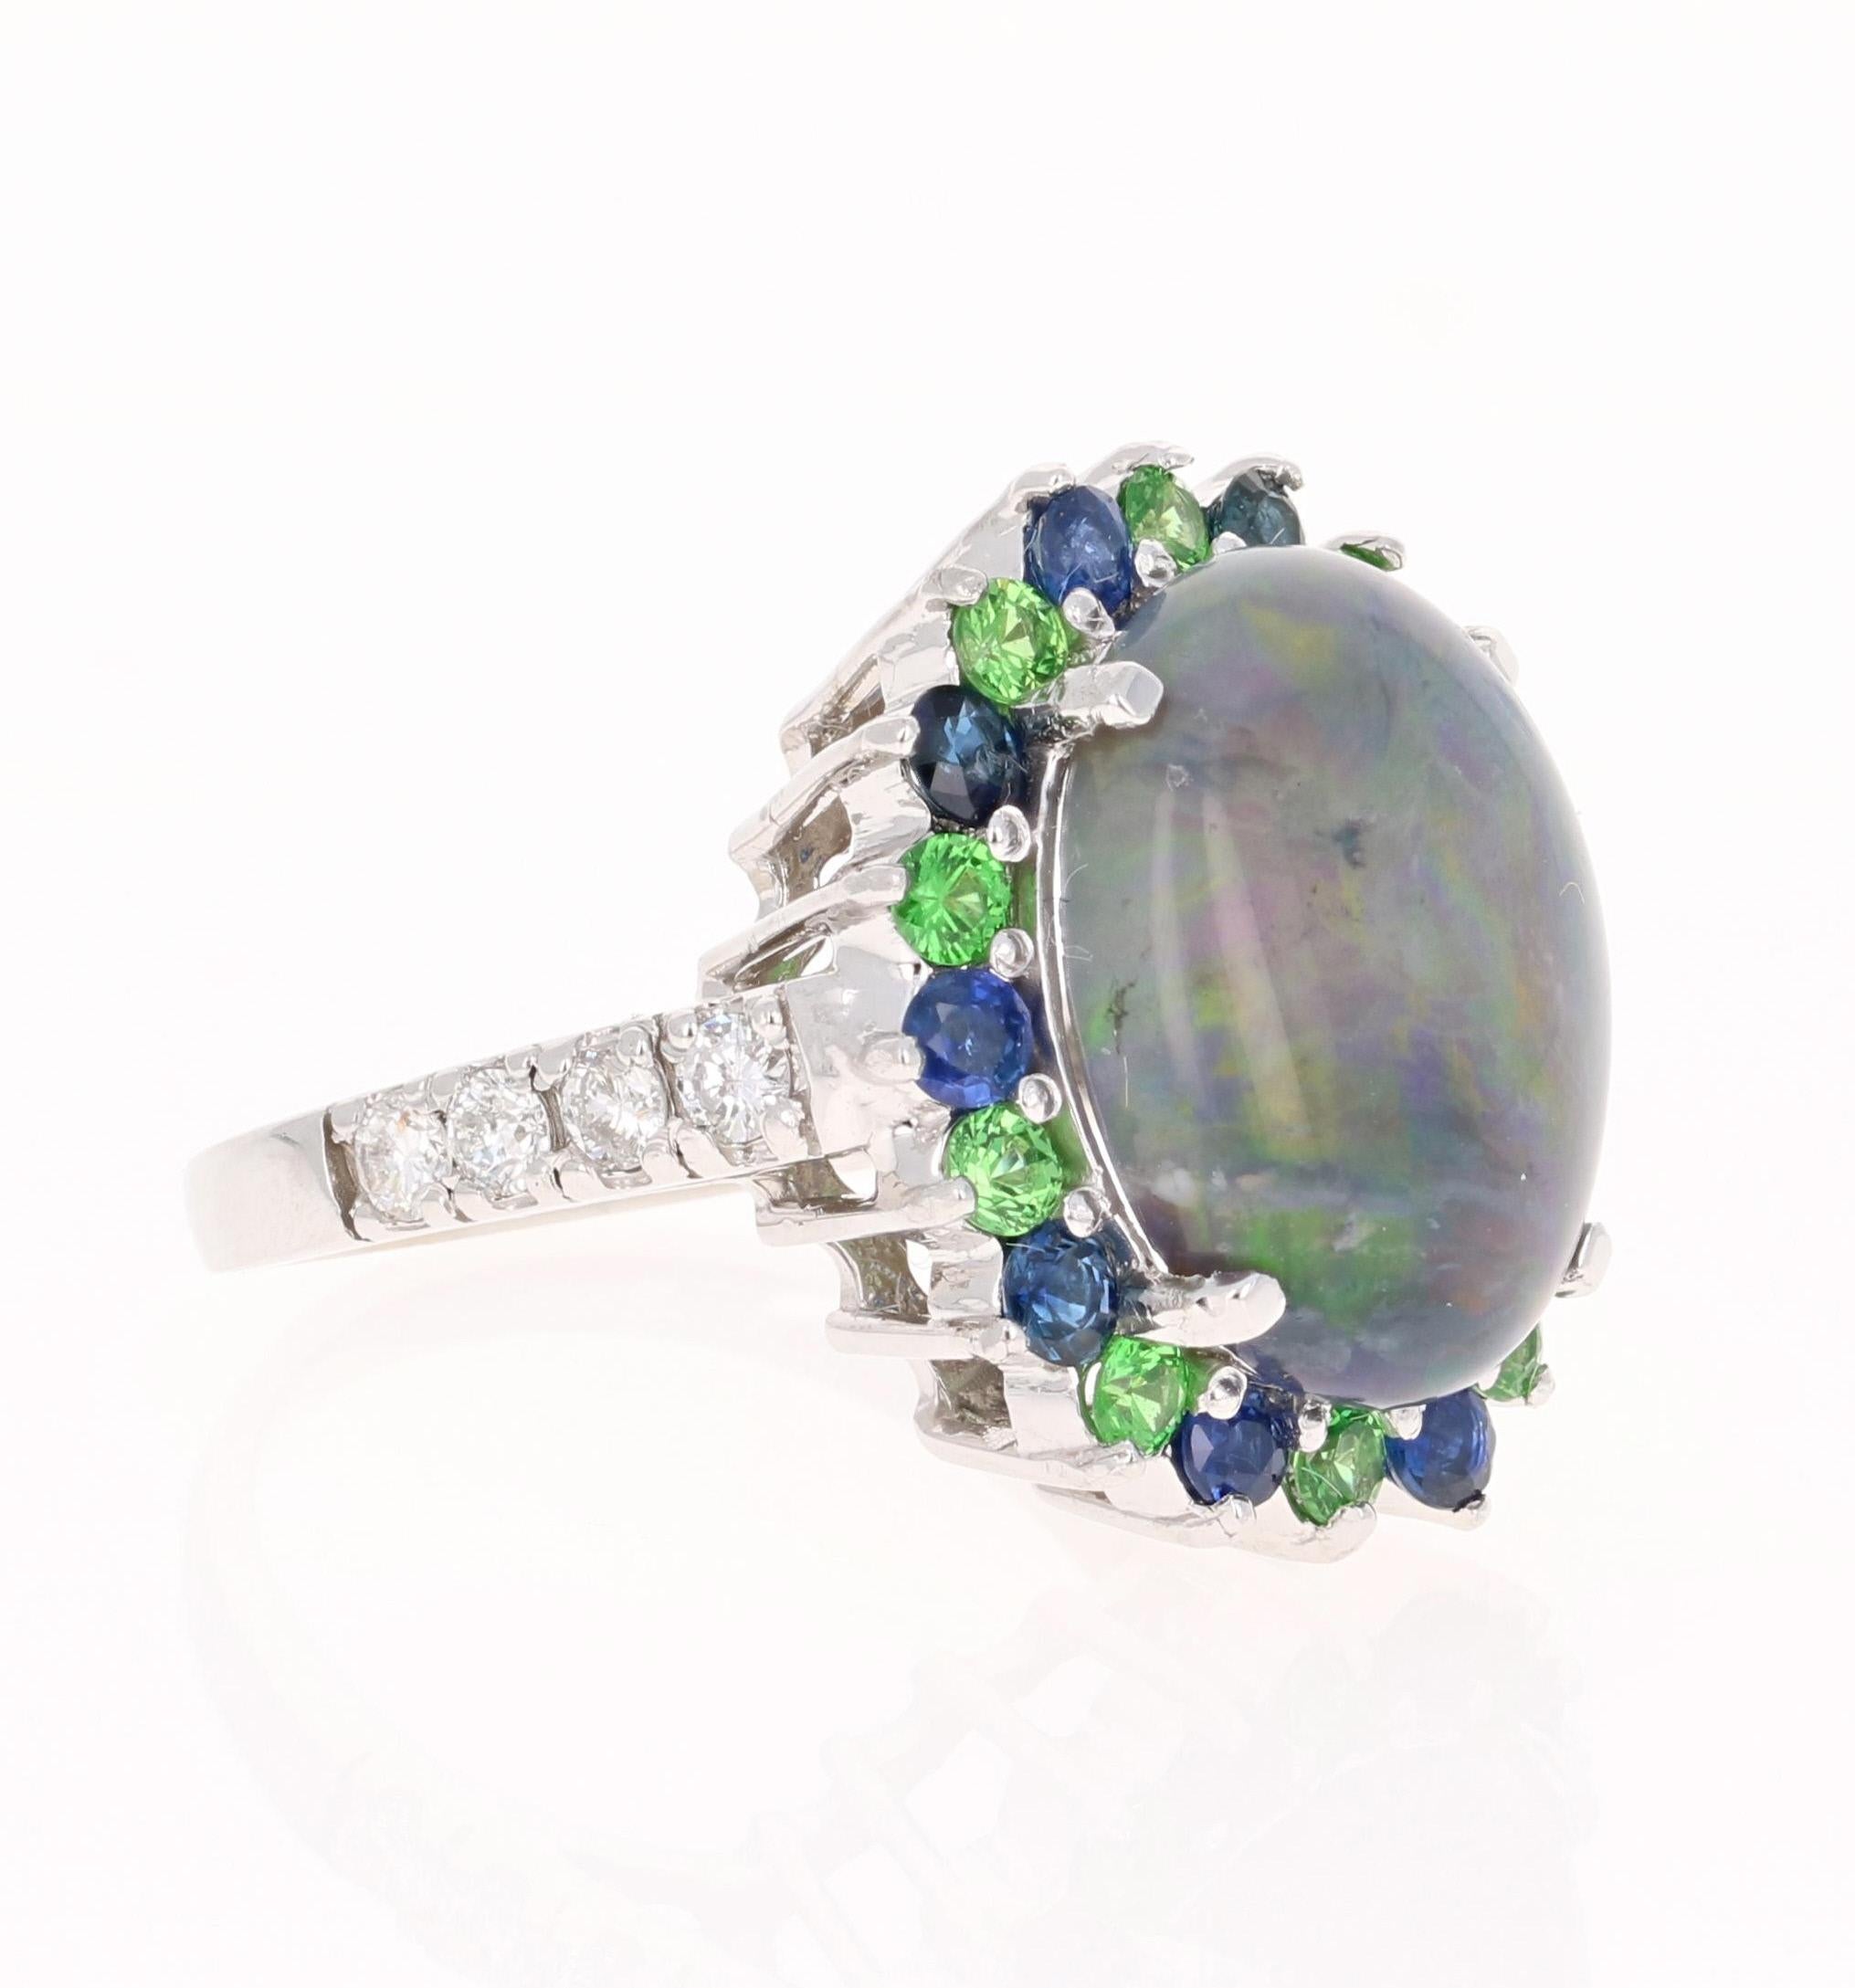 This gorgeou cocktail ring has a large & beautiful Oval Cut Australian Opal that weighs 5.49 Carats. The color of the Opal is a stunning blueish green and is very rare and precious. The ring also has 10 Round Cut Tsavorites that weigh 0.58 Carats